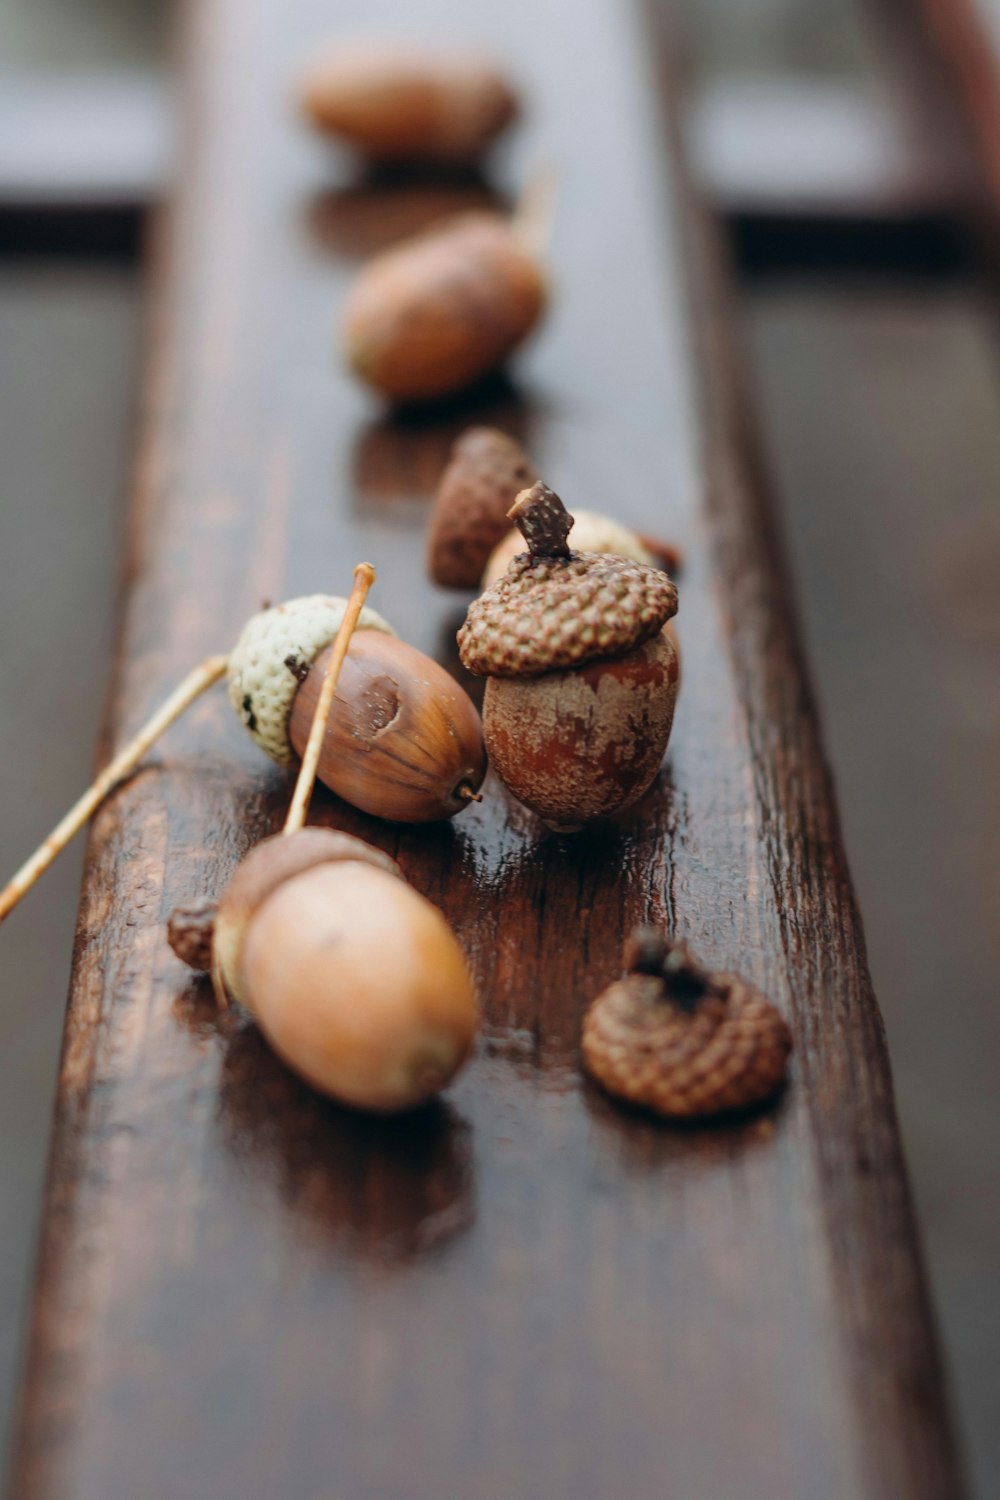 brown and white round fruit on brown wooden table